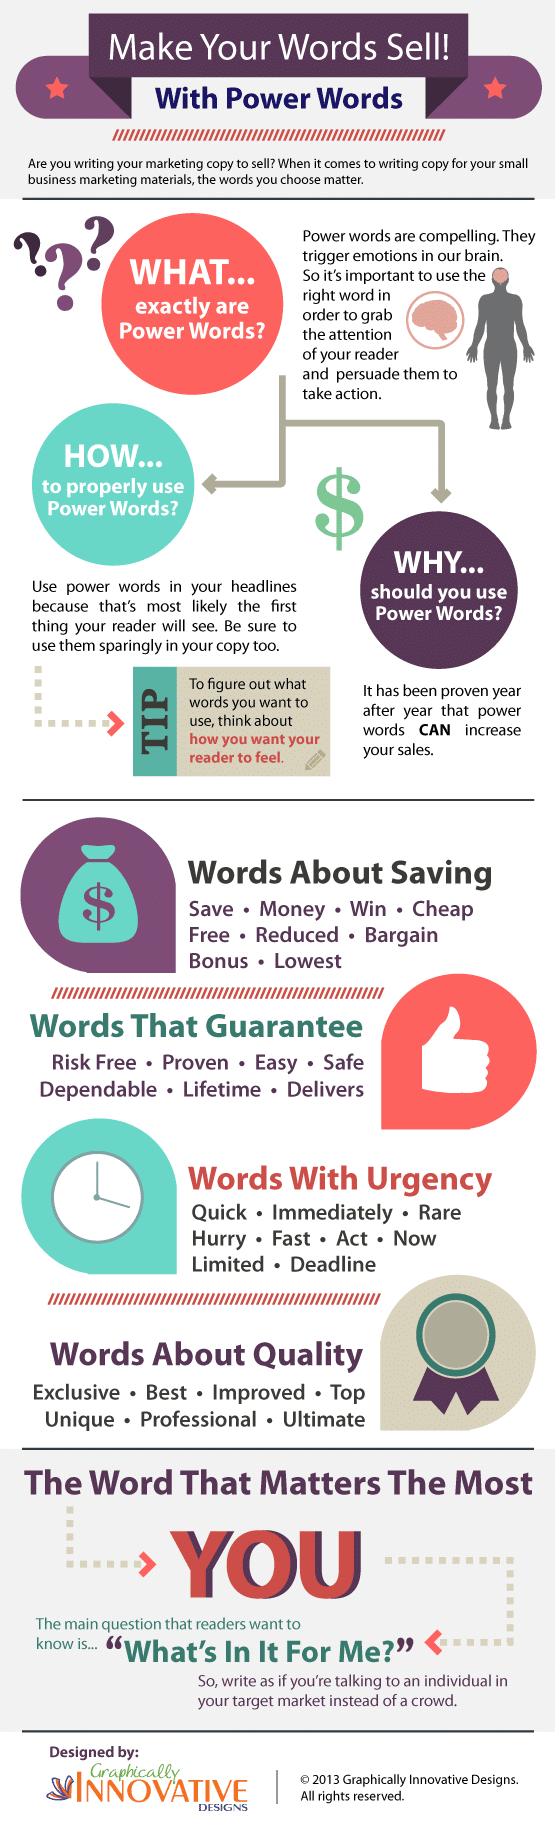 Top 32 Power Words That Will Really Sell Your Content [Infographic]